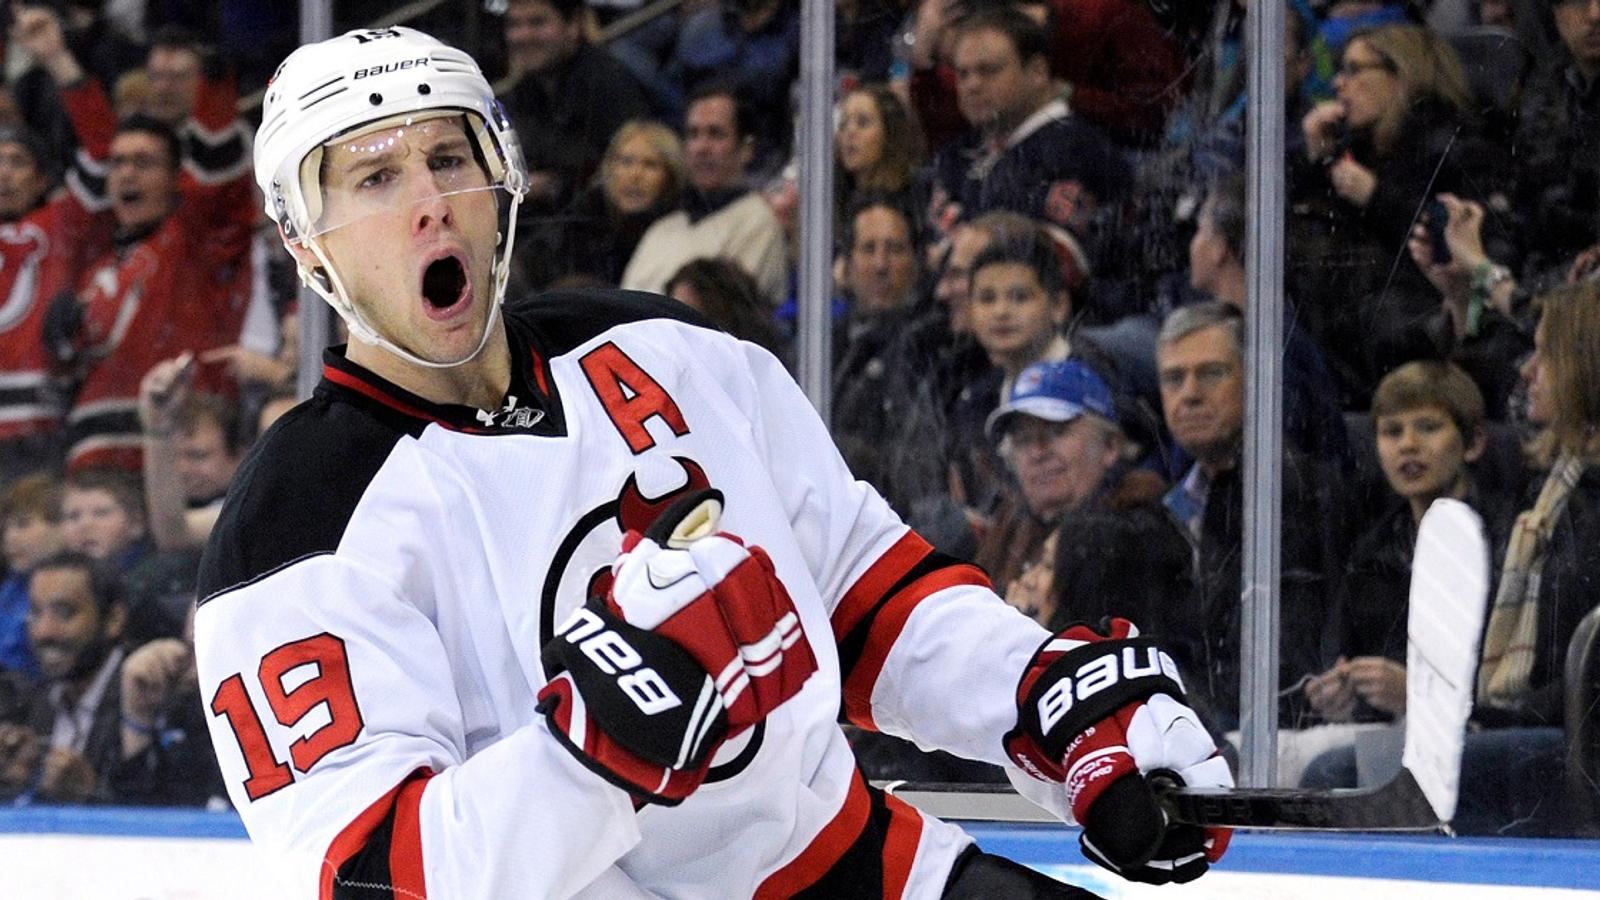 Travis Zajac announces retirement and the next step in his NHL career.